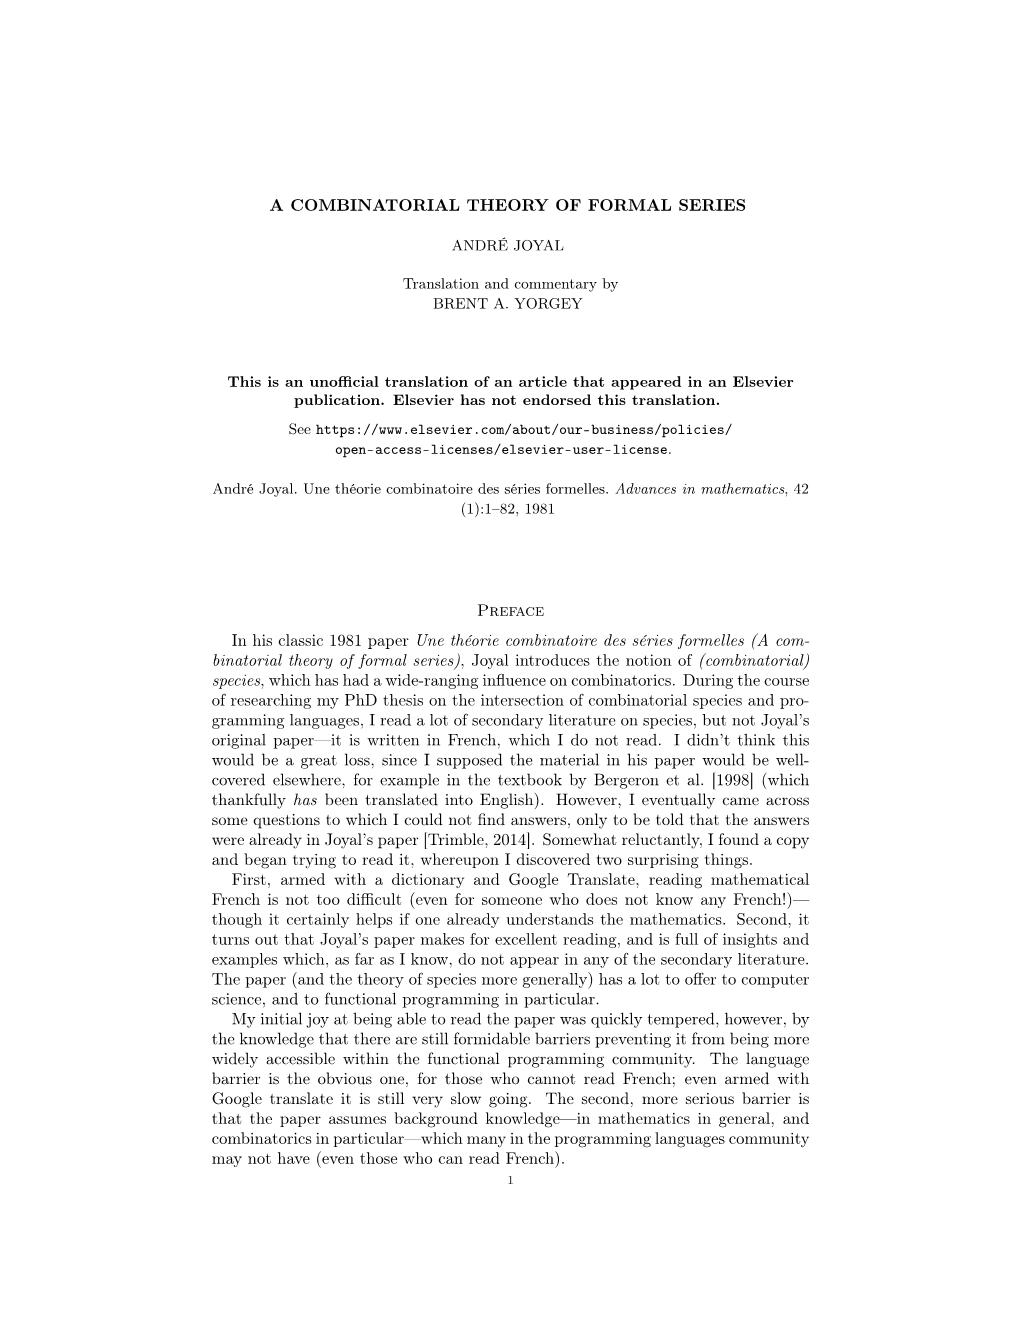 A COMBINATORIAL THEORY of FORMAL SERIES Preface in His